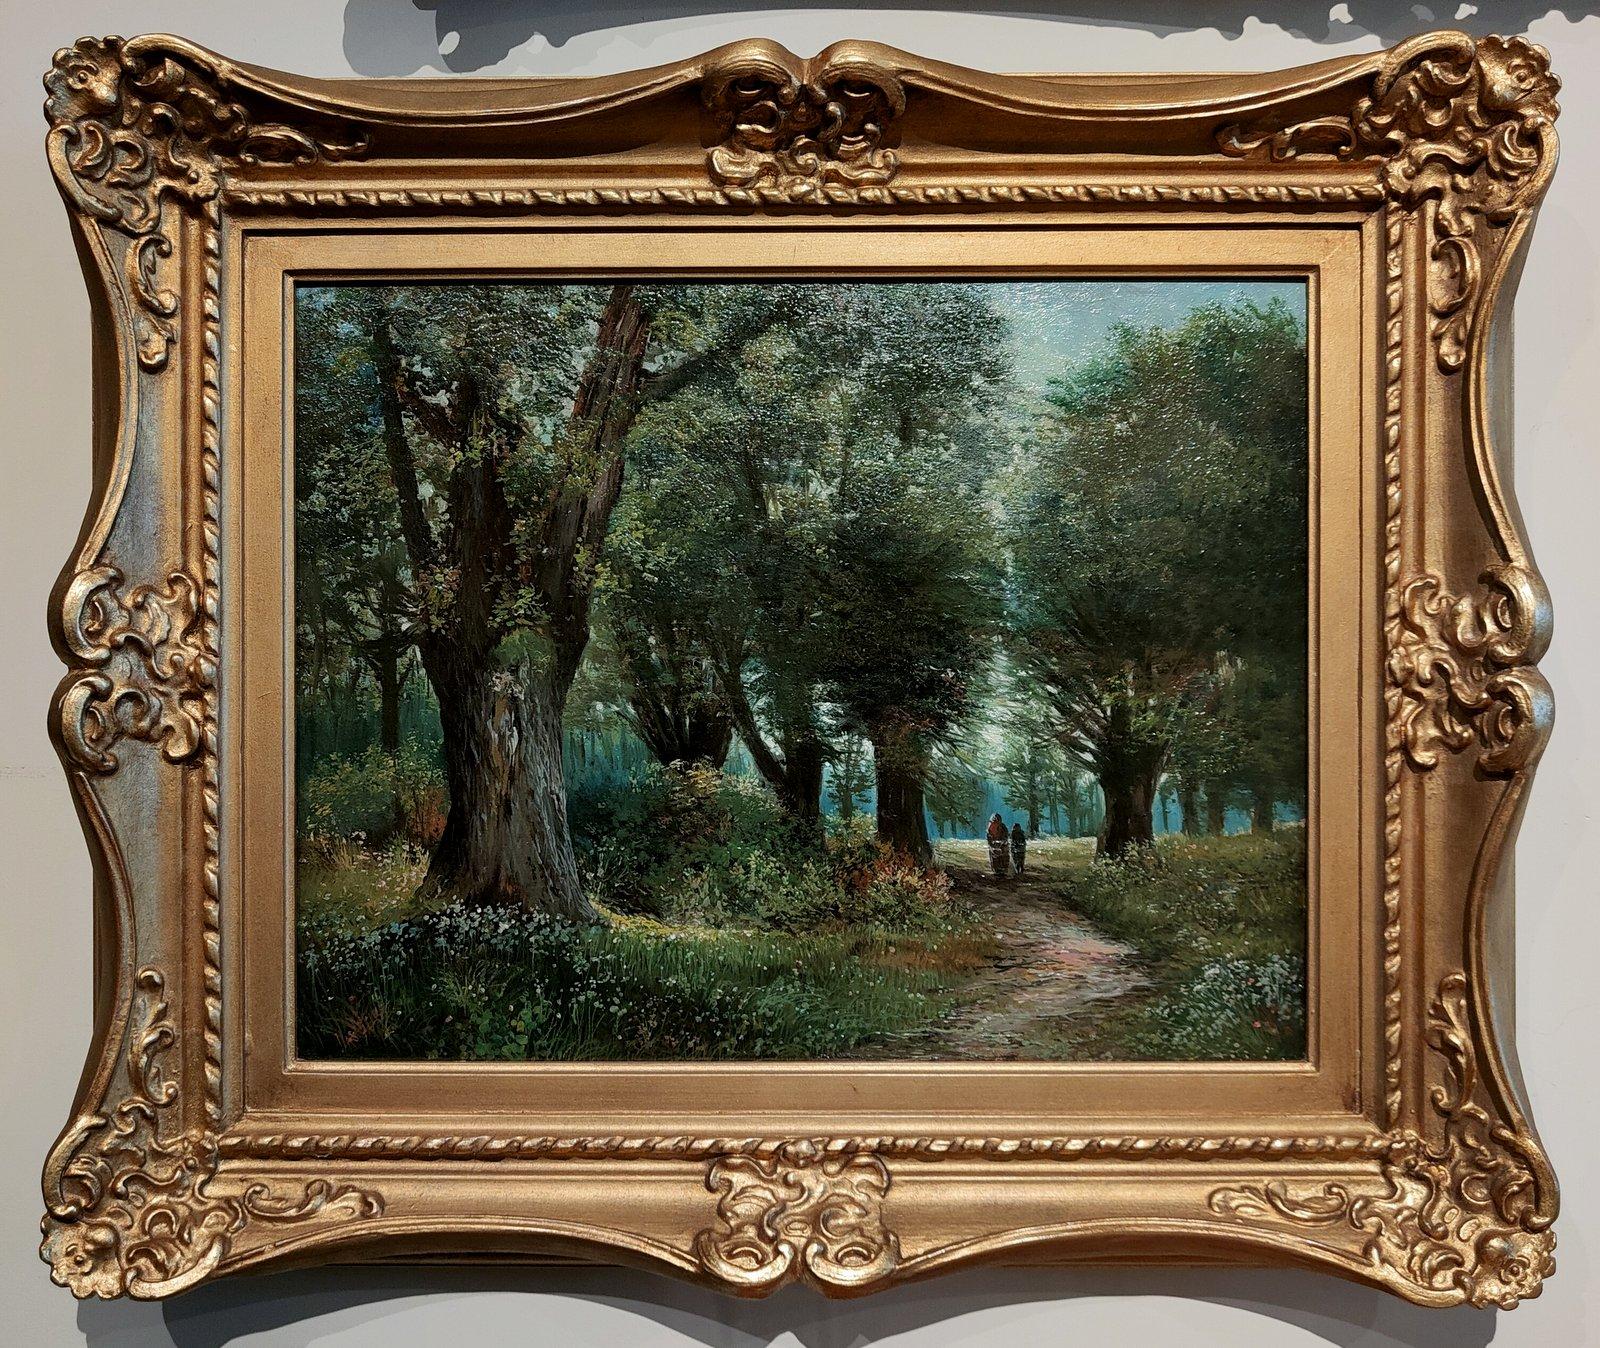 Oil Painting by J Laslelles "A Scene in Epping Forest" flourished 1895 -1920 London painter of atmospheric landscapes in his soft impressionistic style. Oil on canvas. Signed title on original canvas verso. 

Dimensions unframed:
height 14" x width